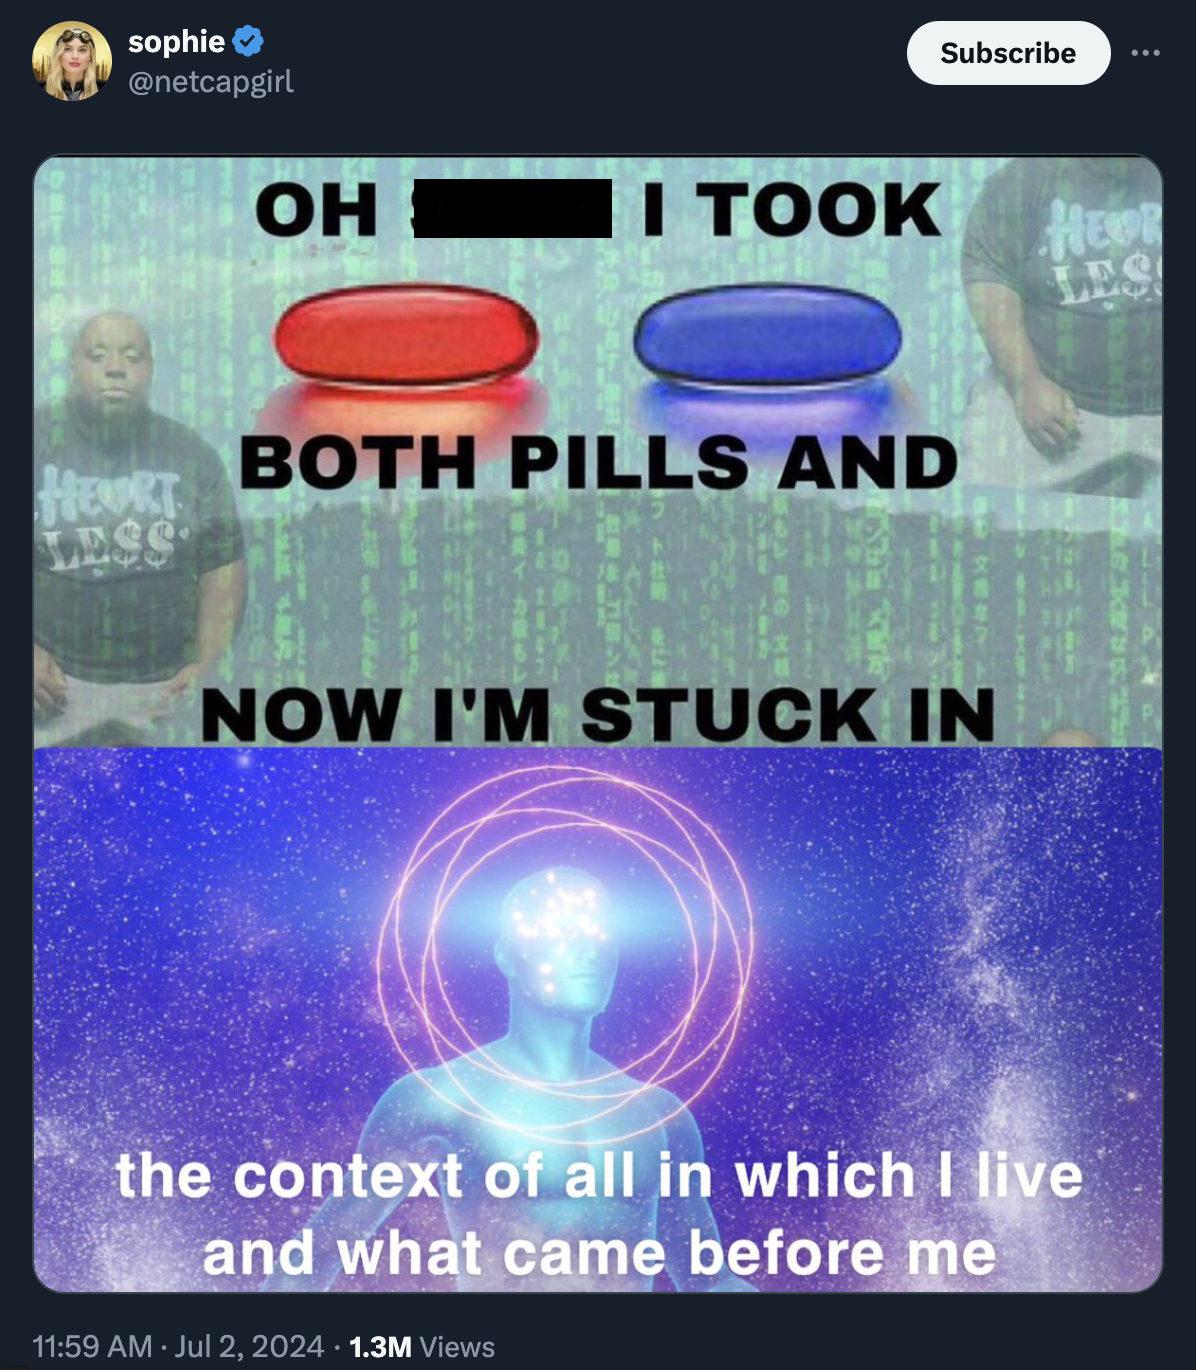 took both pills now i m stuck - sophie Heurt Wess Subscribe Oh I Took Heor Both Pills And Now I'M Stuck In the context of all in which I live and what came before me 1.3M Views